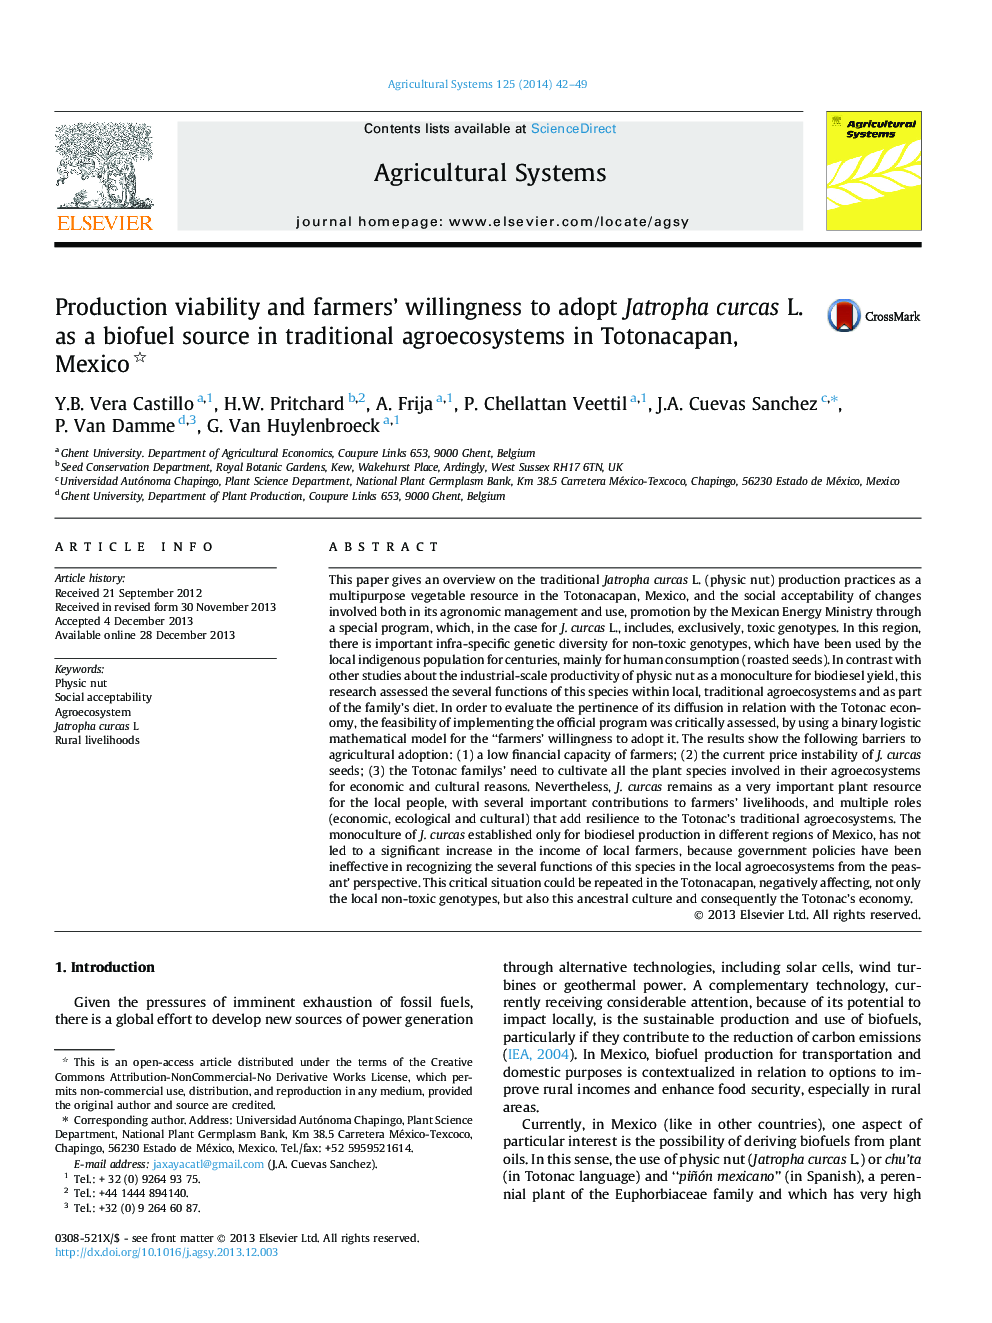 Production viability and farmers’ willingness to adopt Jatropha curcas L. as a biofuel source in traditional agroecosystems in Totonacapan, Mexico 